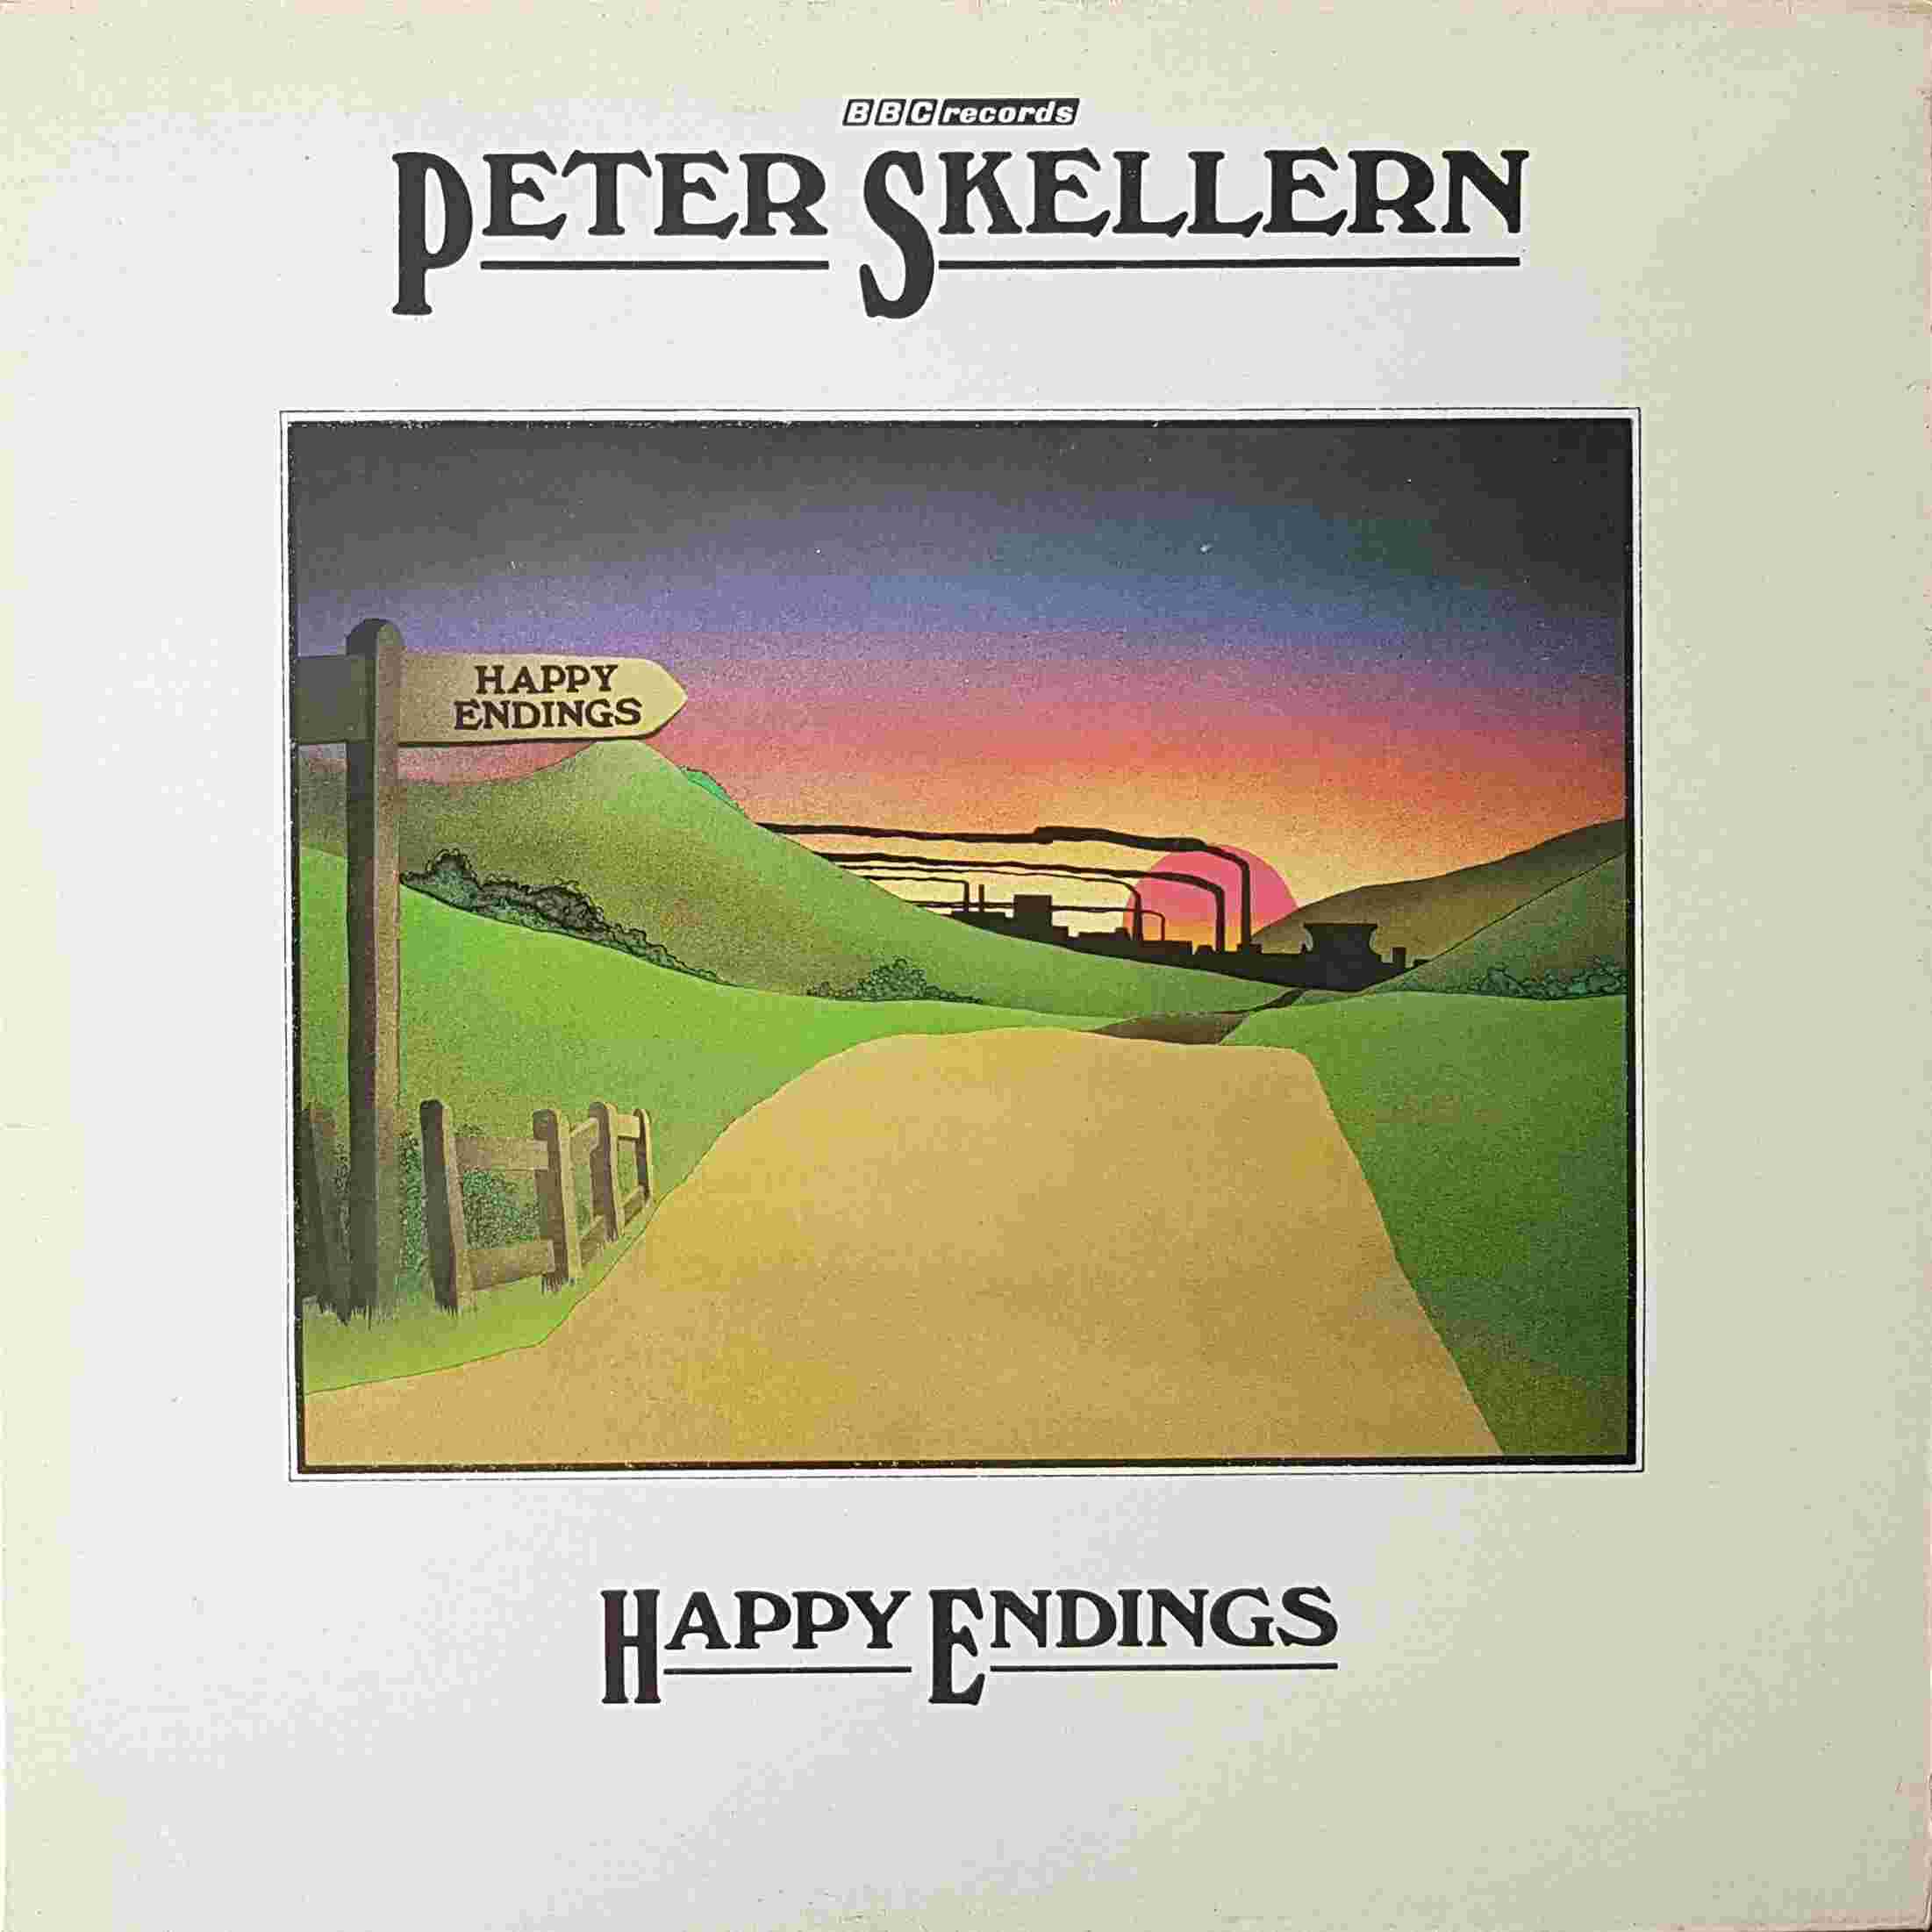 Picture of REP 430 Happy endings by artist Peter Skellern from the BBC albums - Records and Tapes library